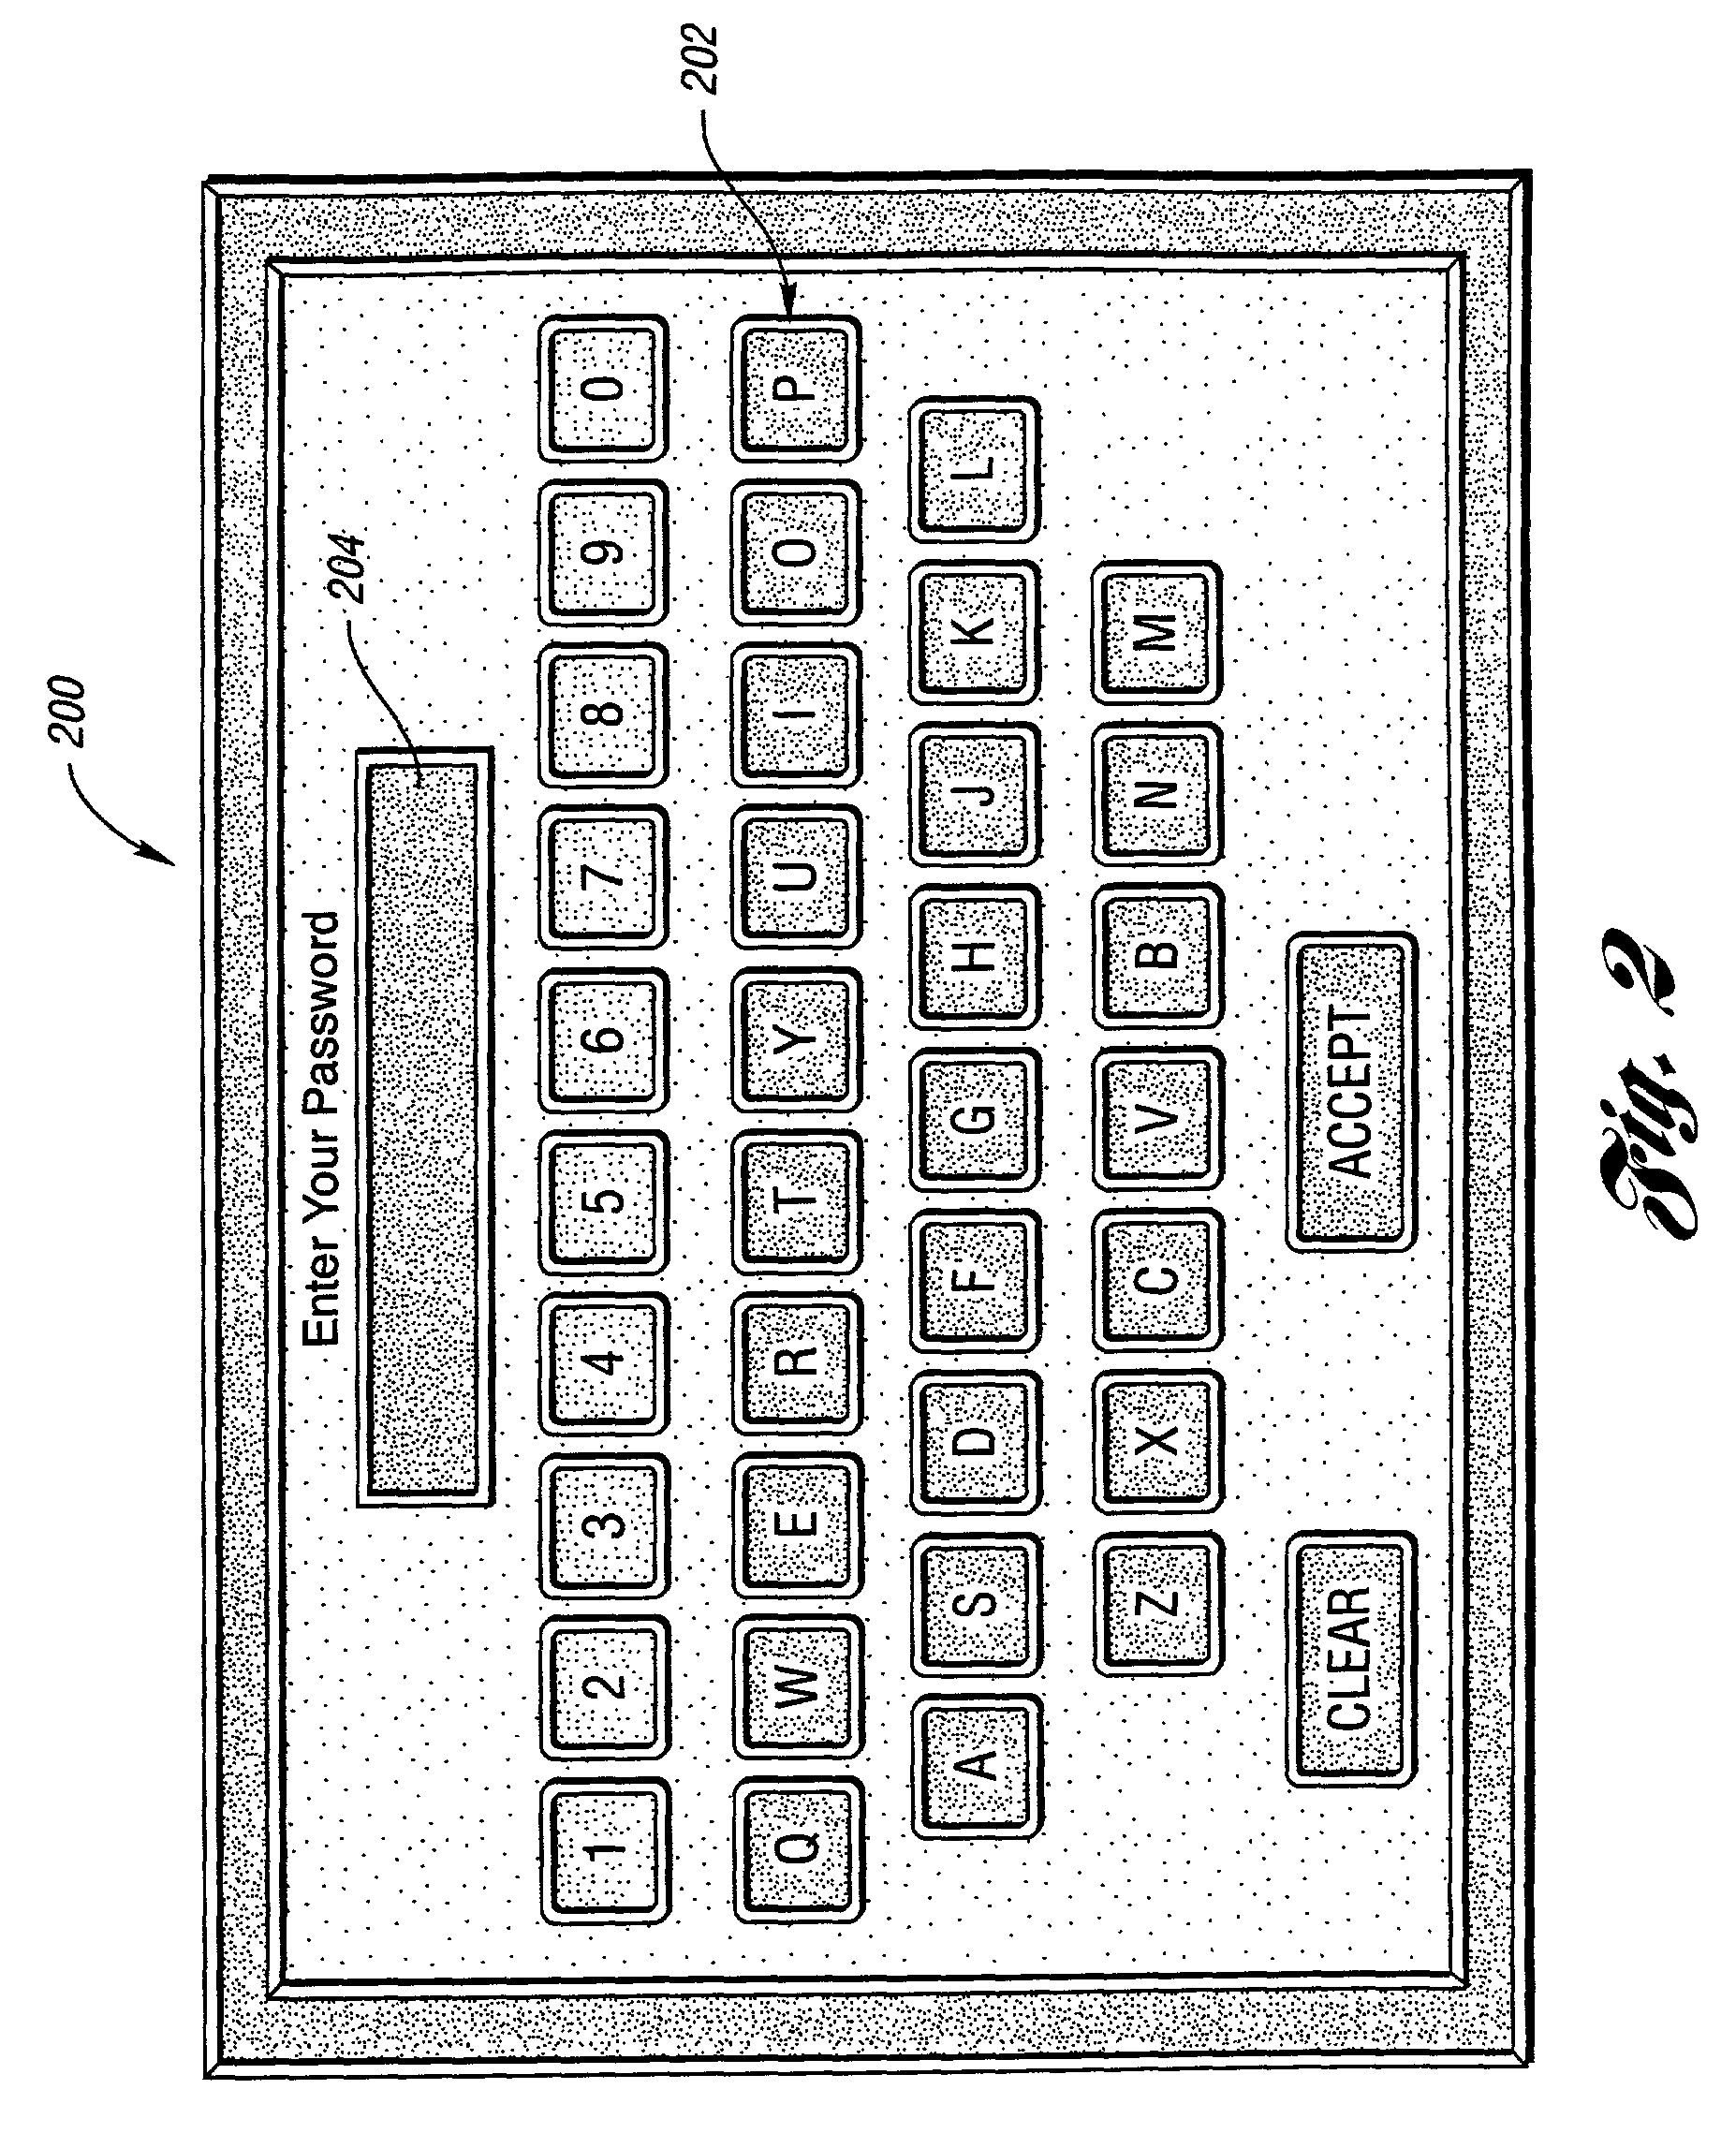 System and method for control of conference facilities and equipment